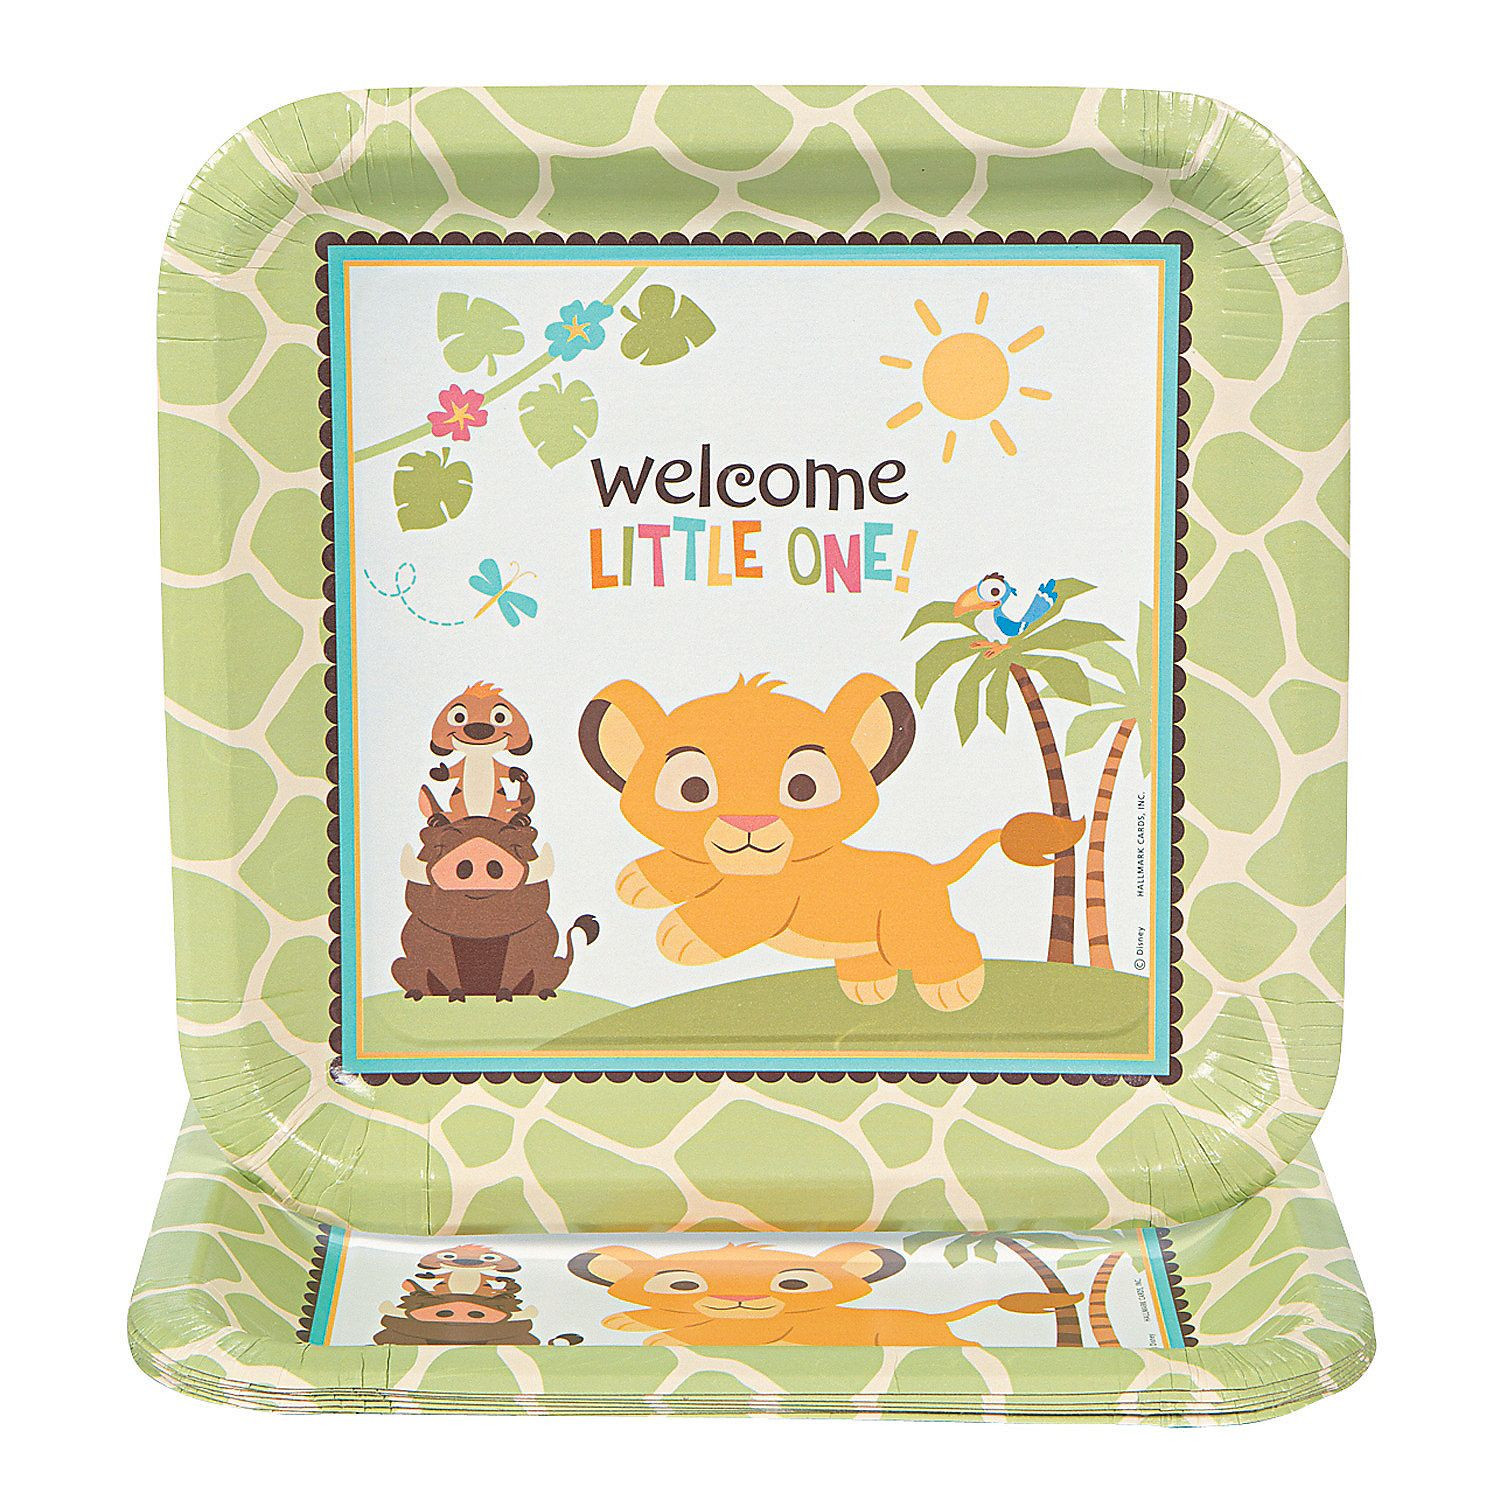 Sweet Circle Of Life Baby Shower Party Supplies
 Lion King Sweet Circle Life Baby Shower Dinner Plates